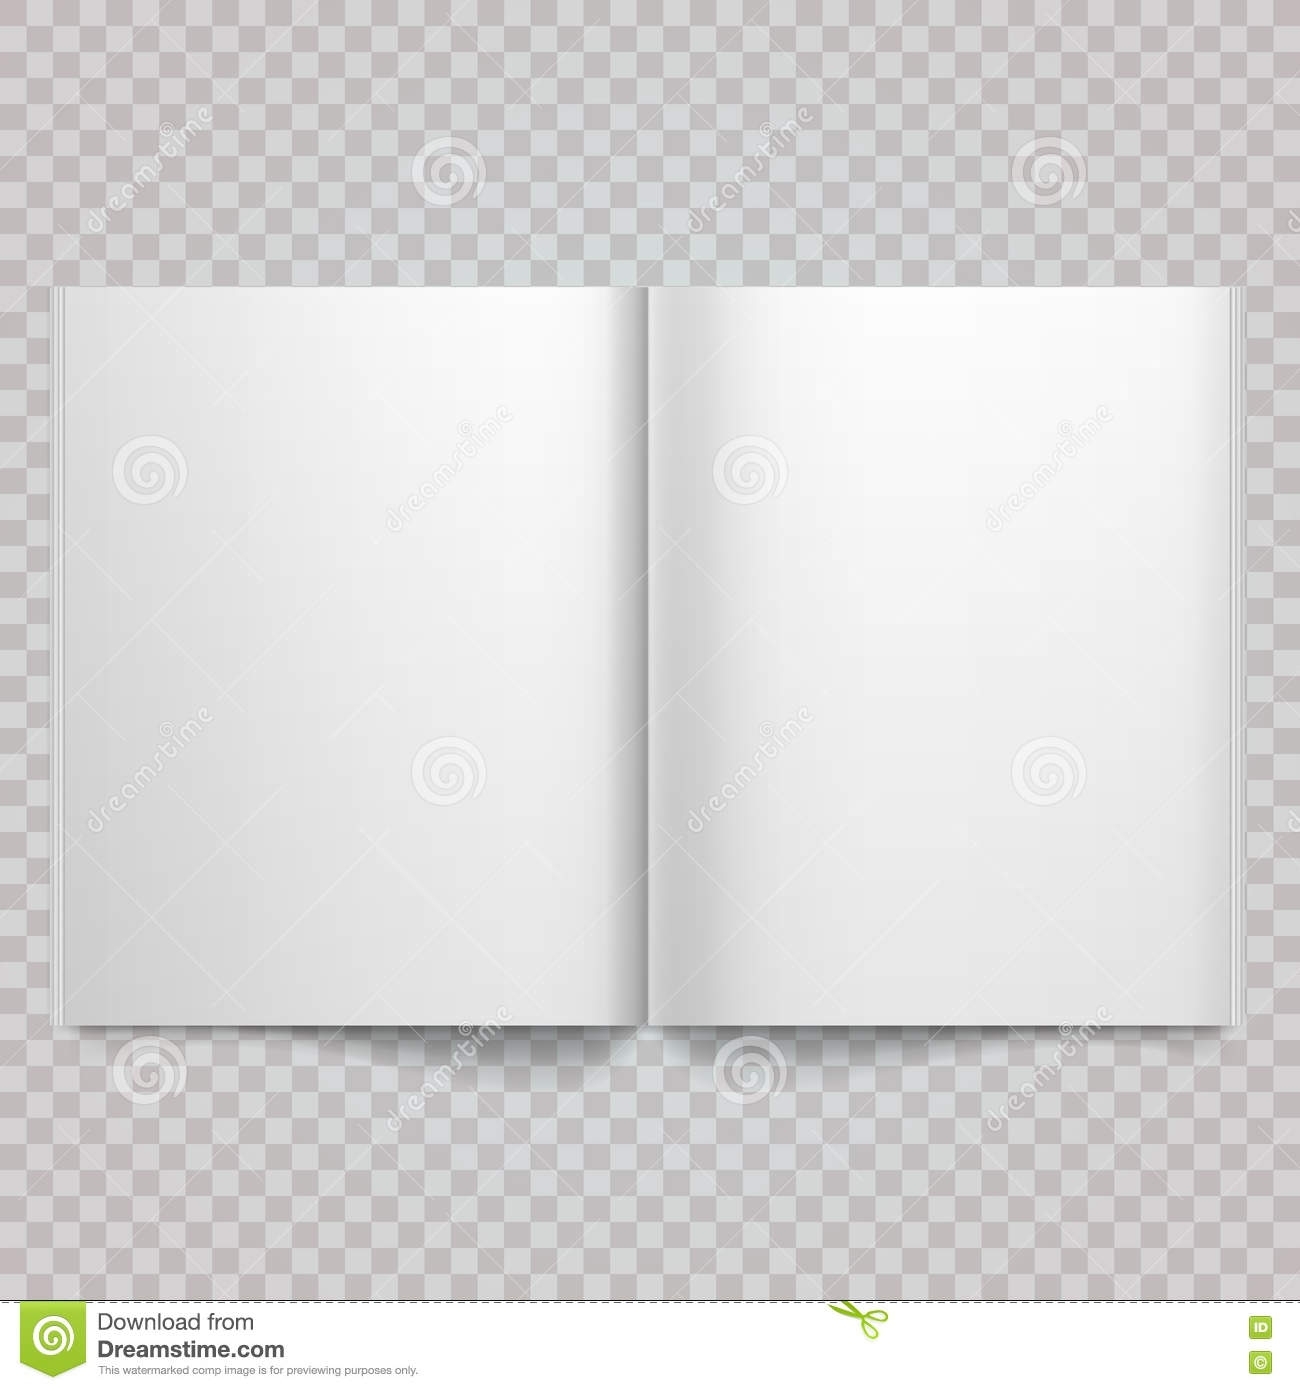 Open Magazine Double Page Spread With Blank Pages. Isolated White Paper Inside Blank Magazine Spread Template